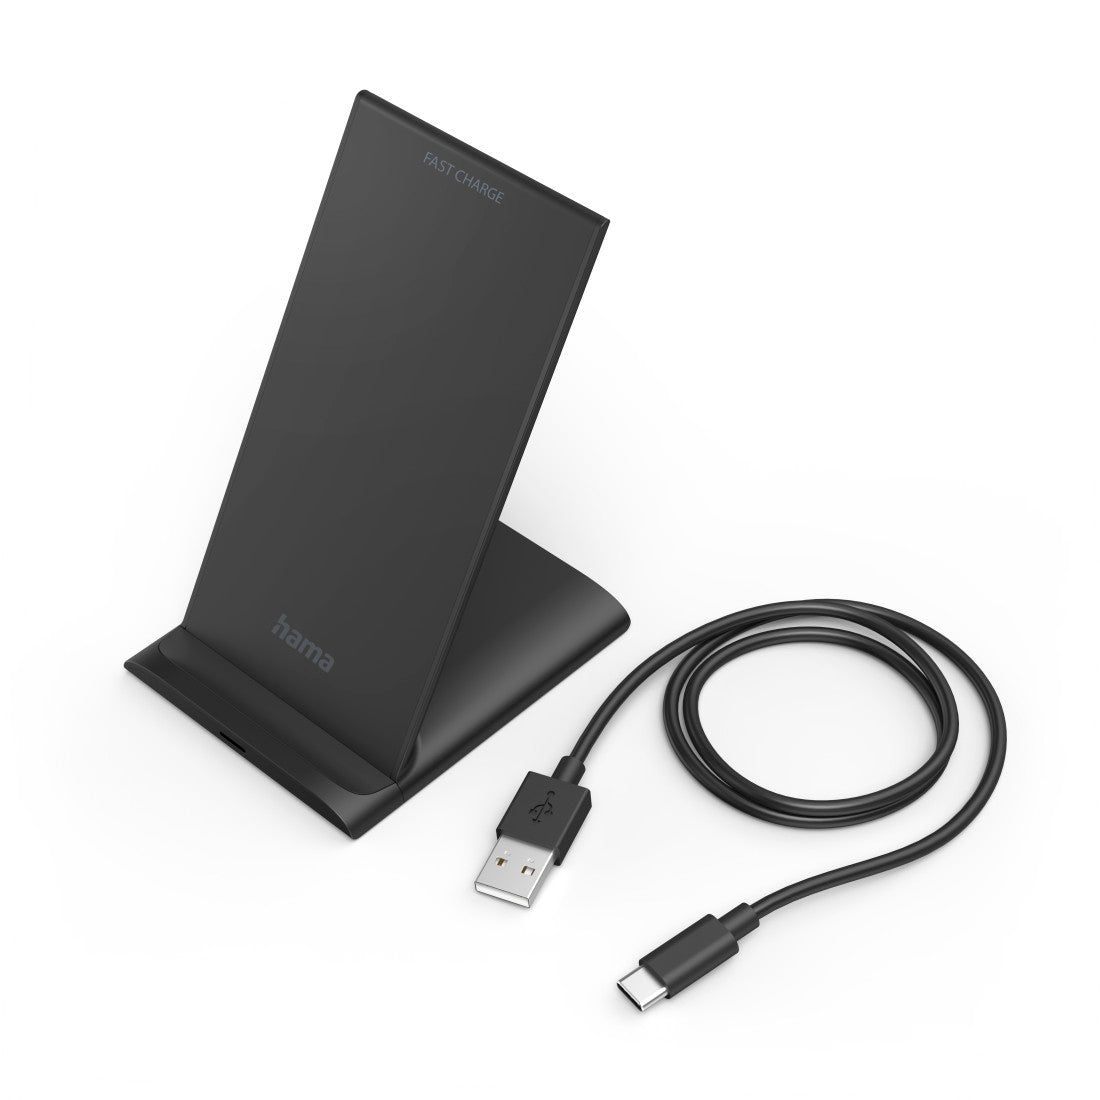 Hama 2000mA Wireless Charger - Black | 488411 from Hama - DID Electrical